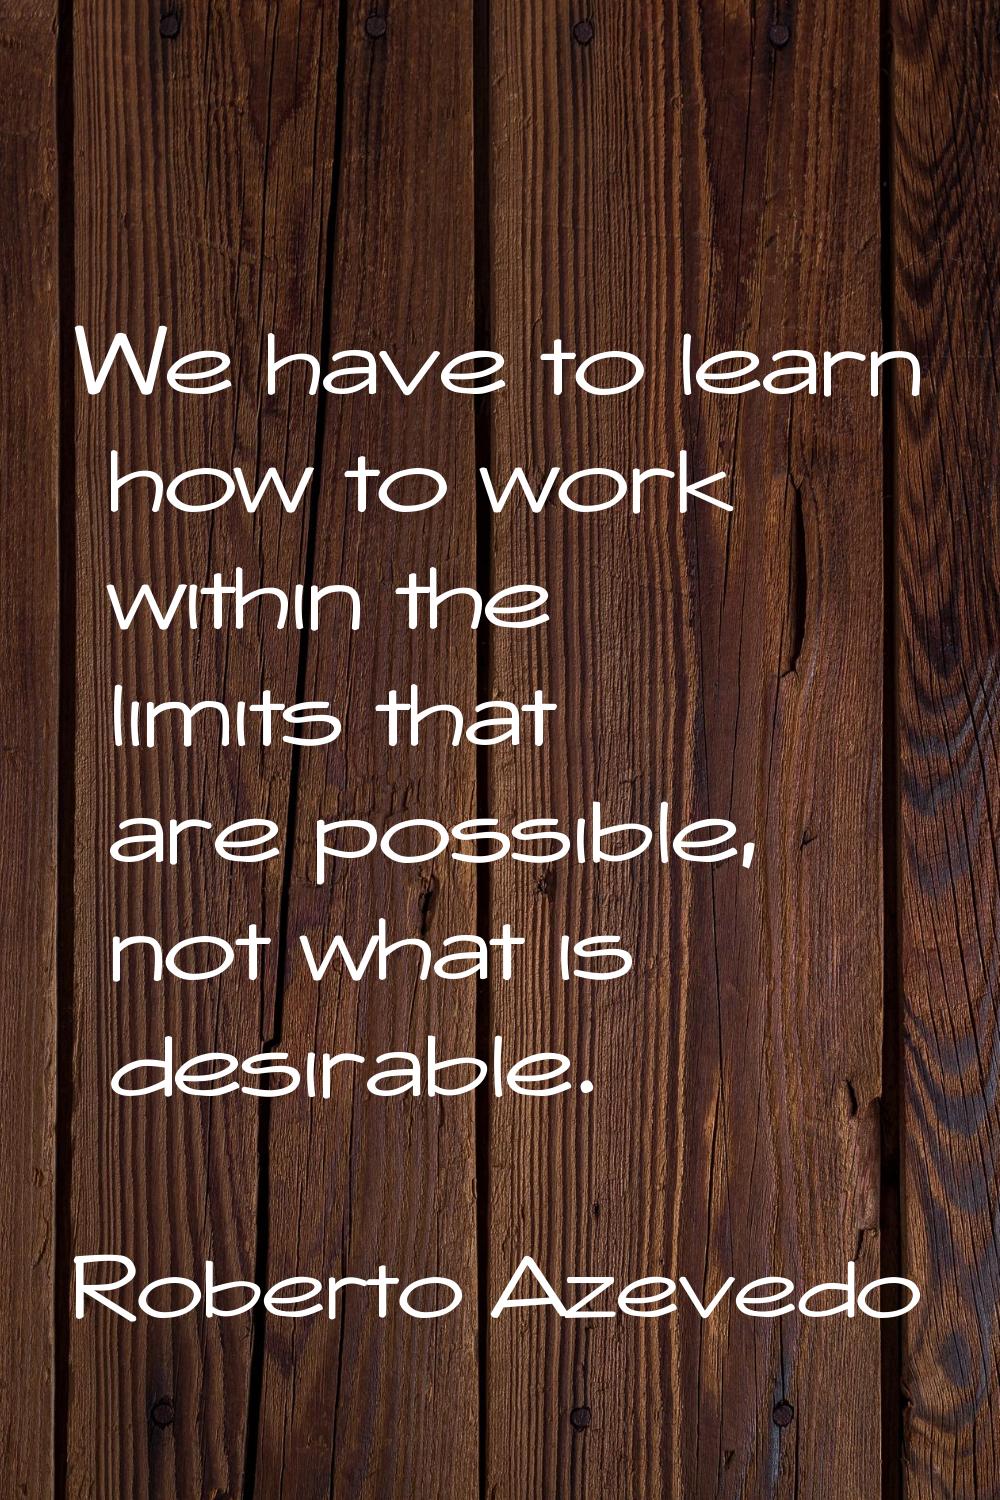 We have to learn how to work within the limits that are possible, not what is desirable.